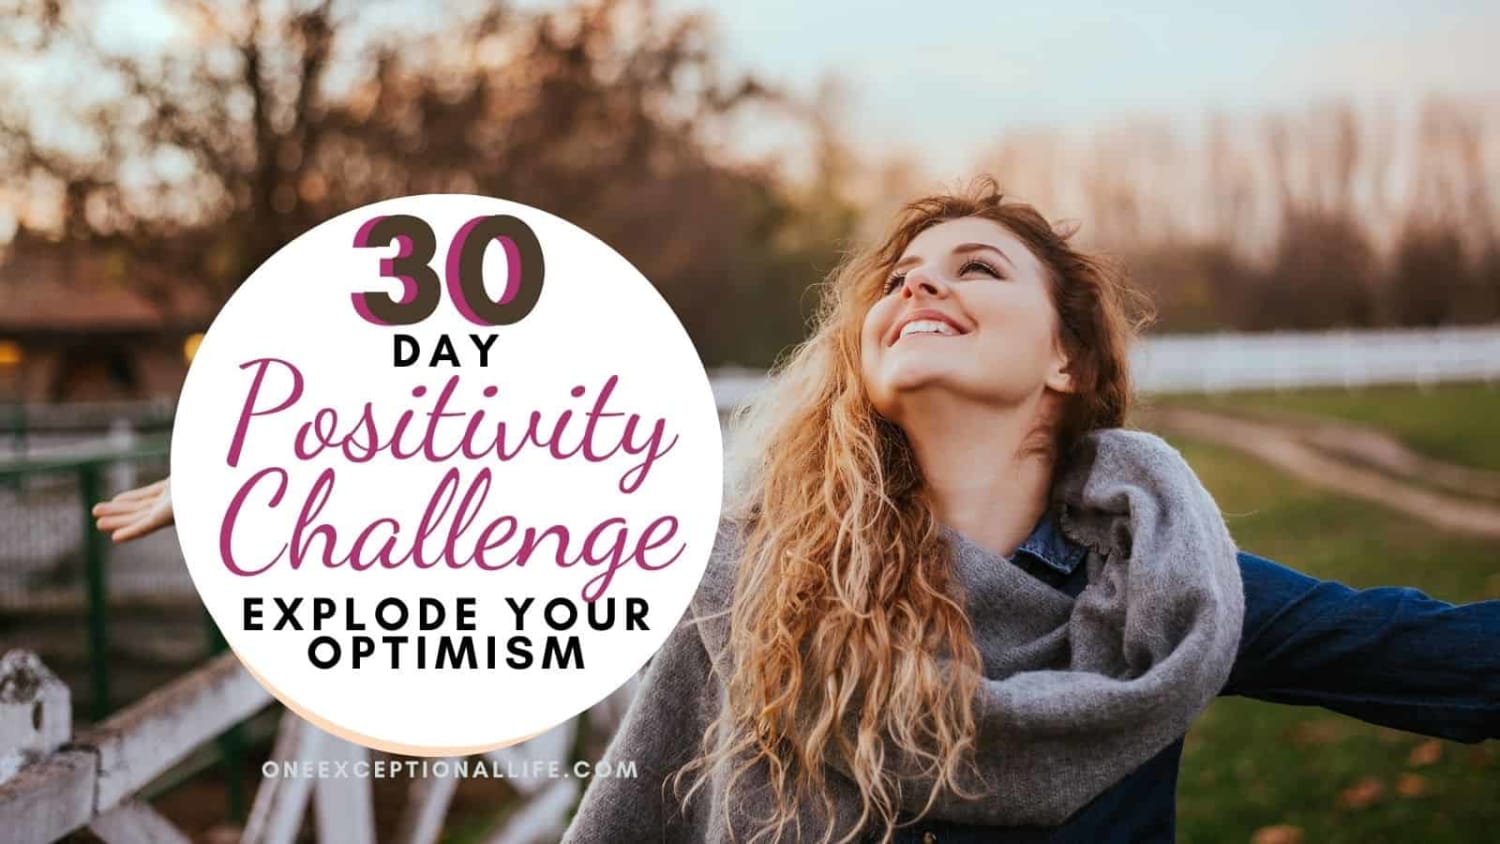 30 Day Positivity Challenge: Explode Your Optimism